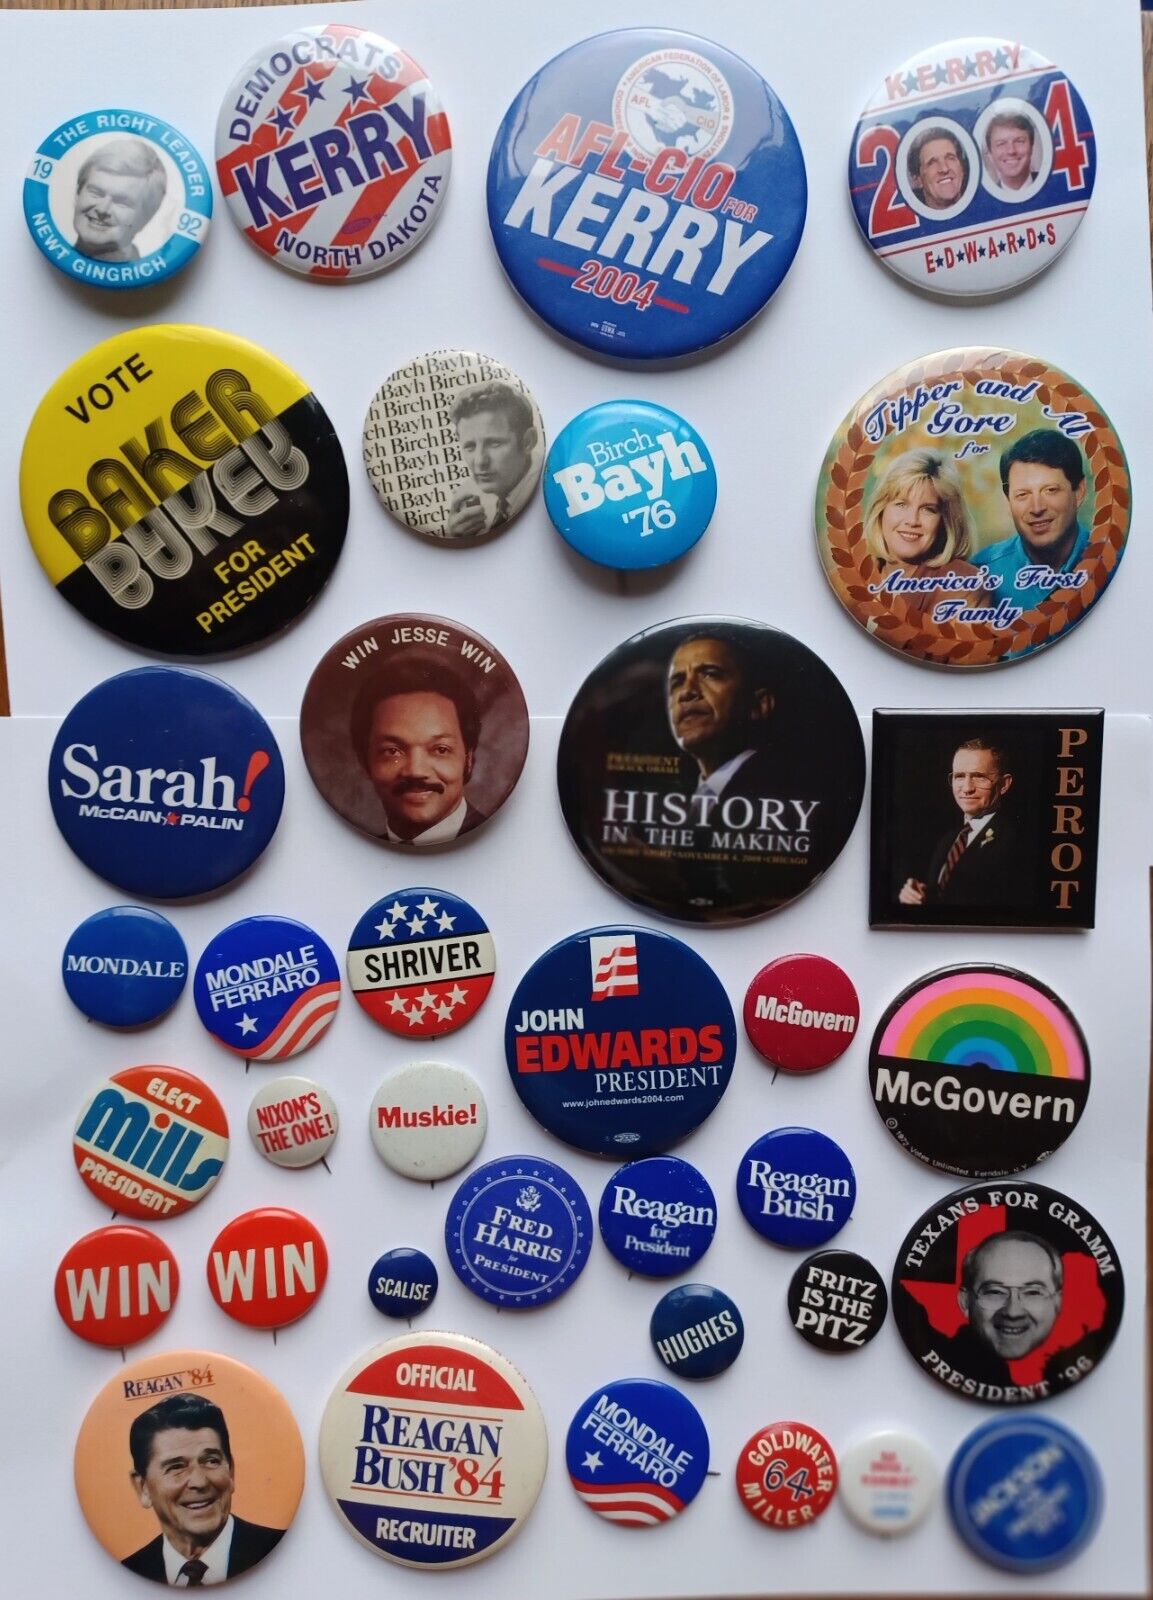 Large Lot of Campaign Buttons Vintage